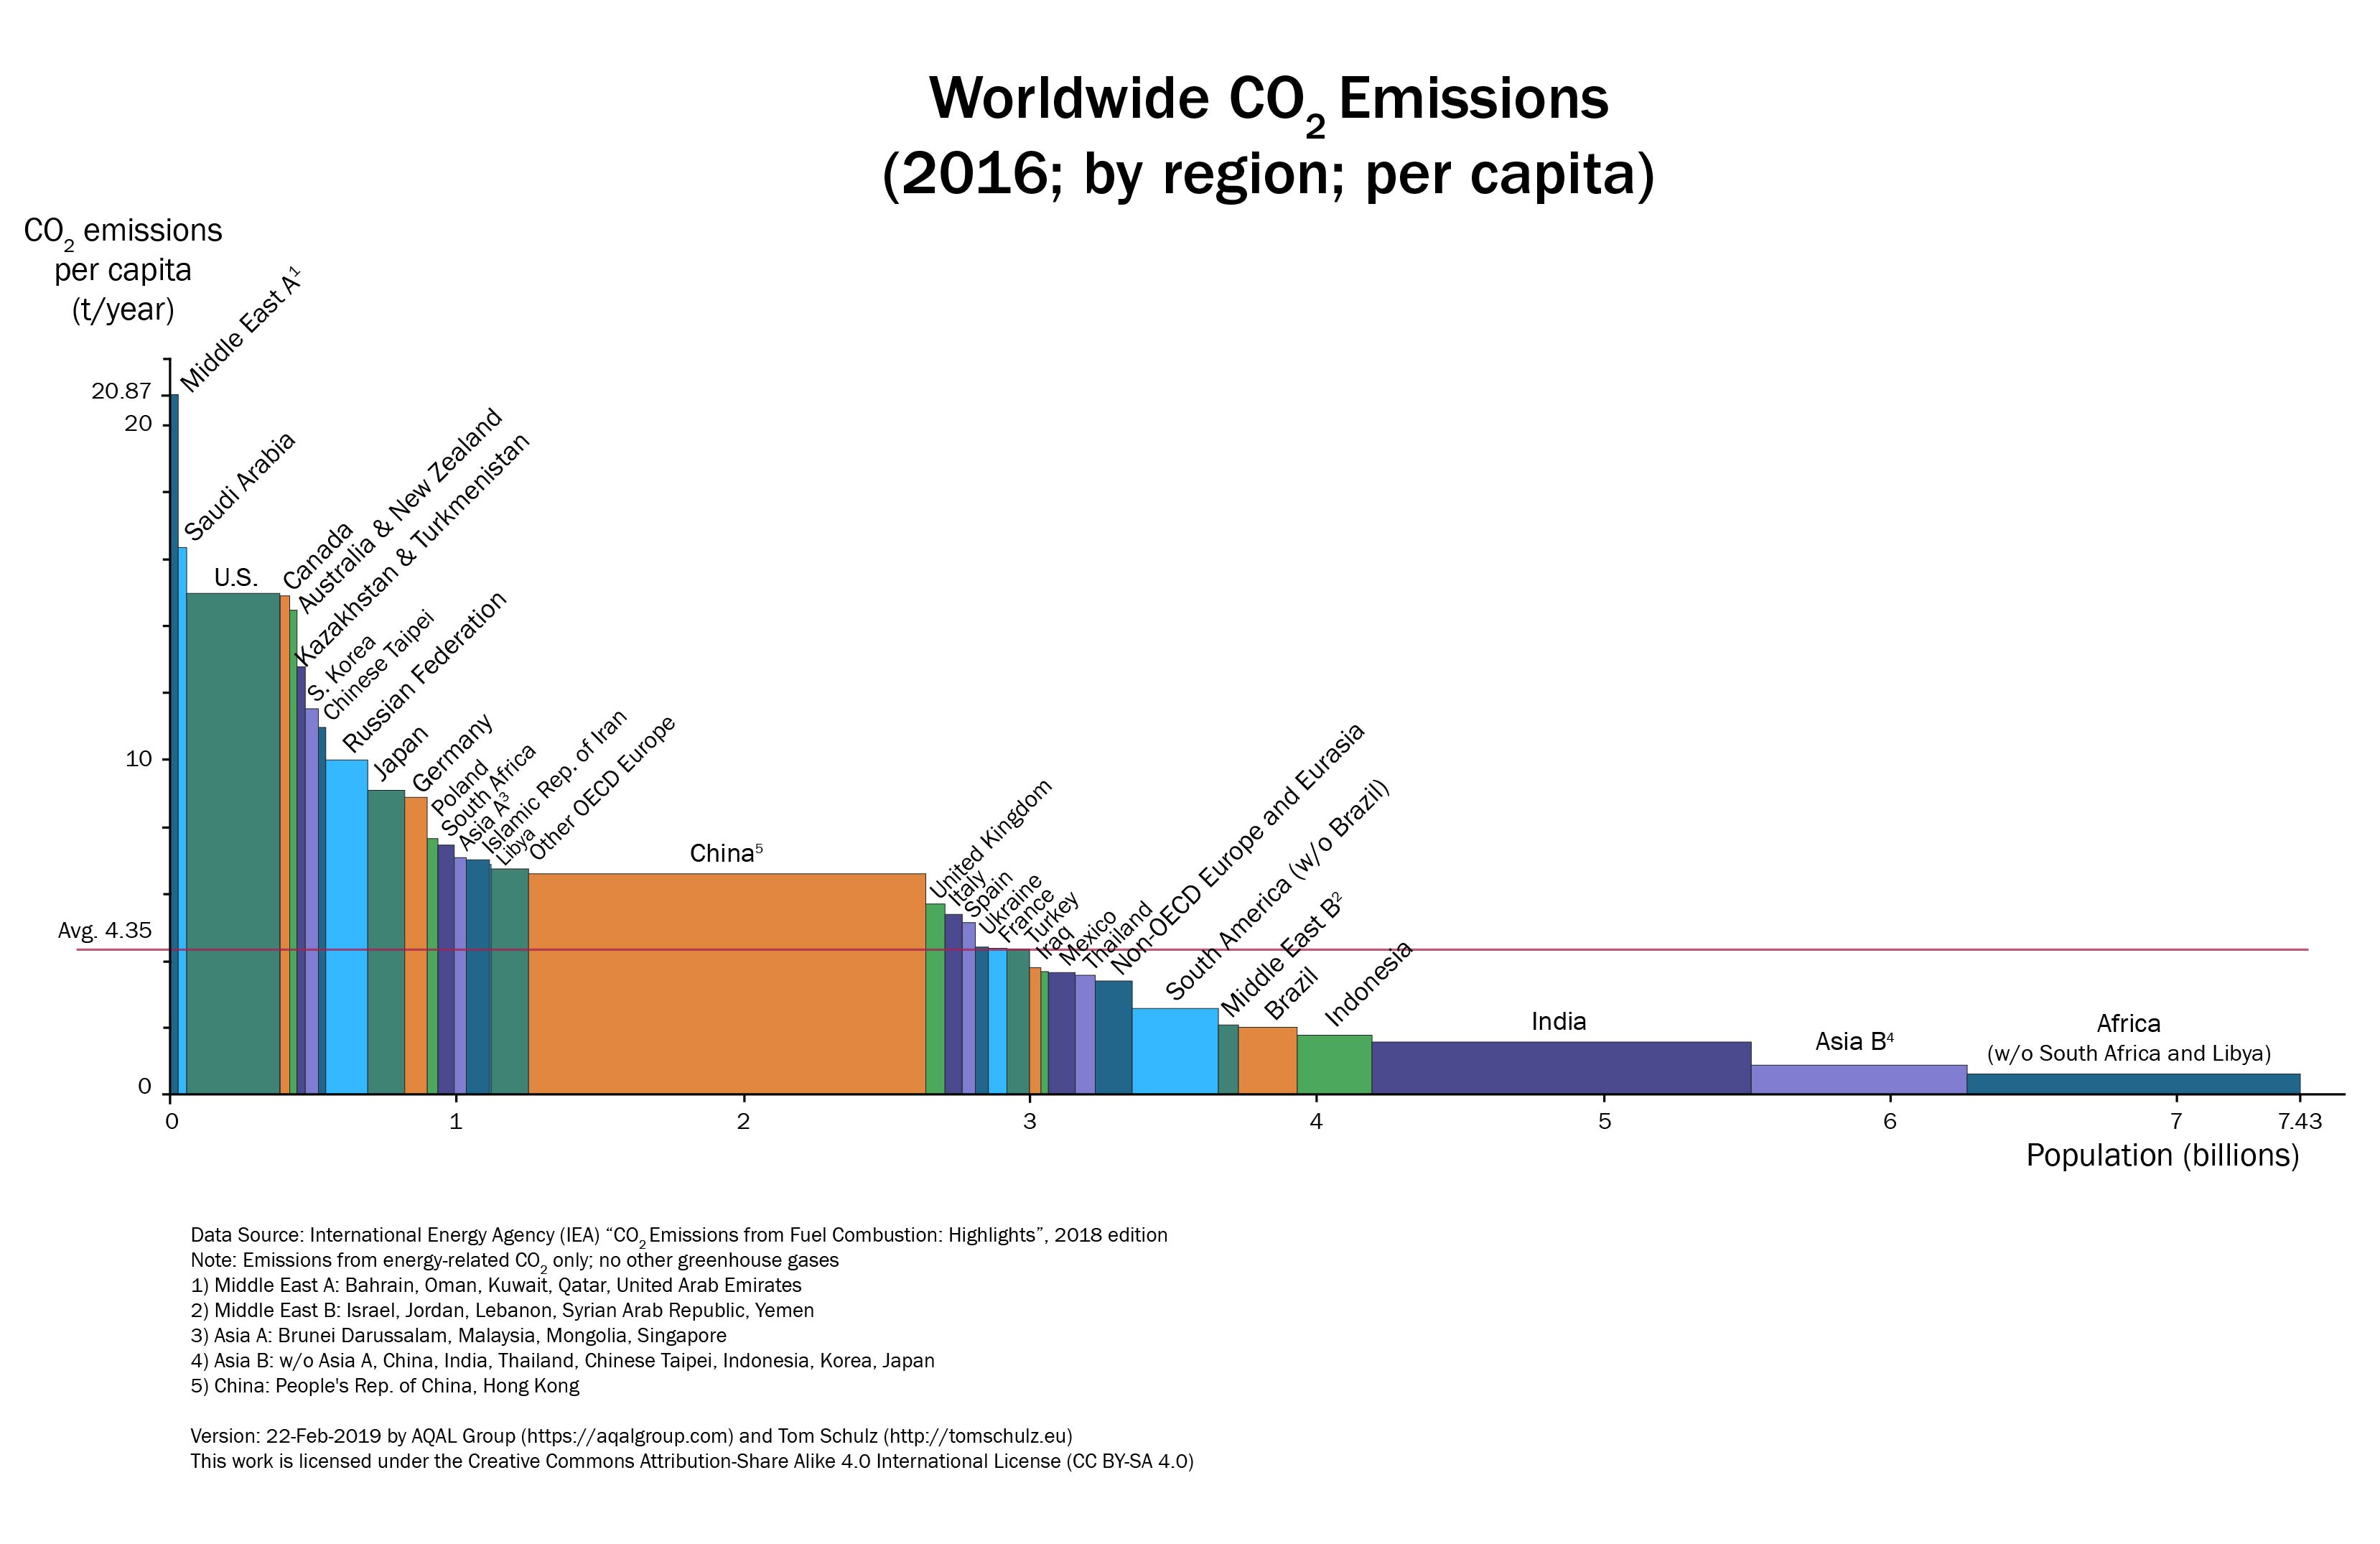 2018 Worldwide CO2 emissions per capita and country